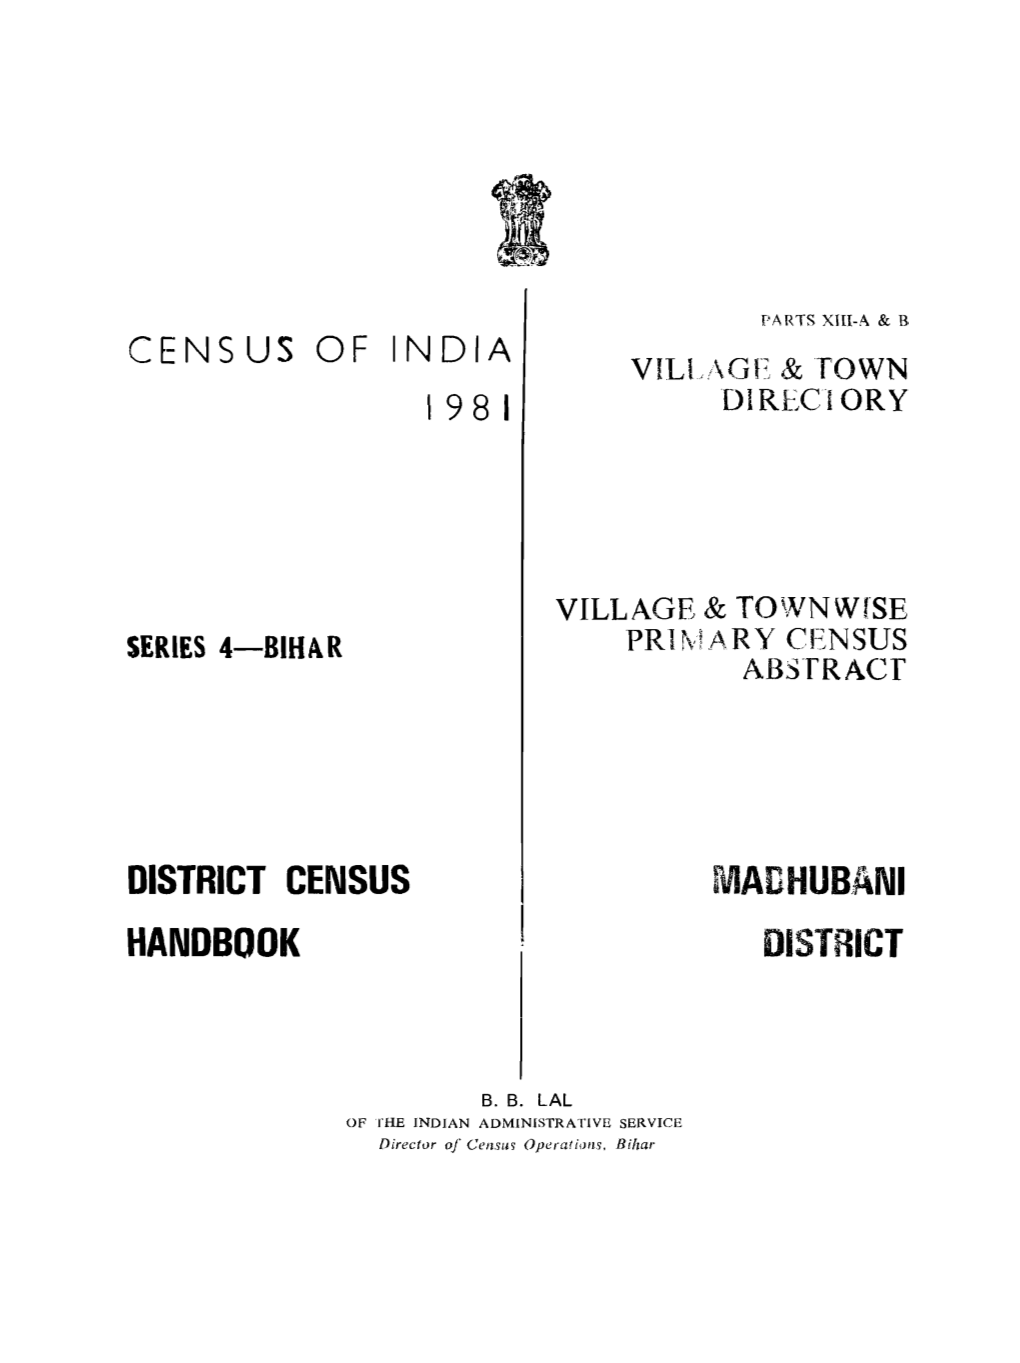 Village & Townwise Primary Census Abstract, Madhubani Dostrict